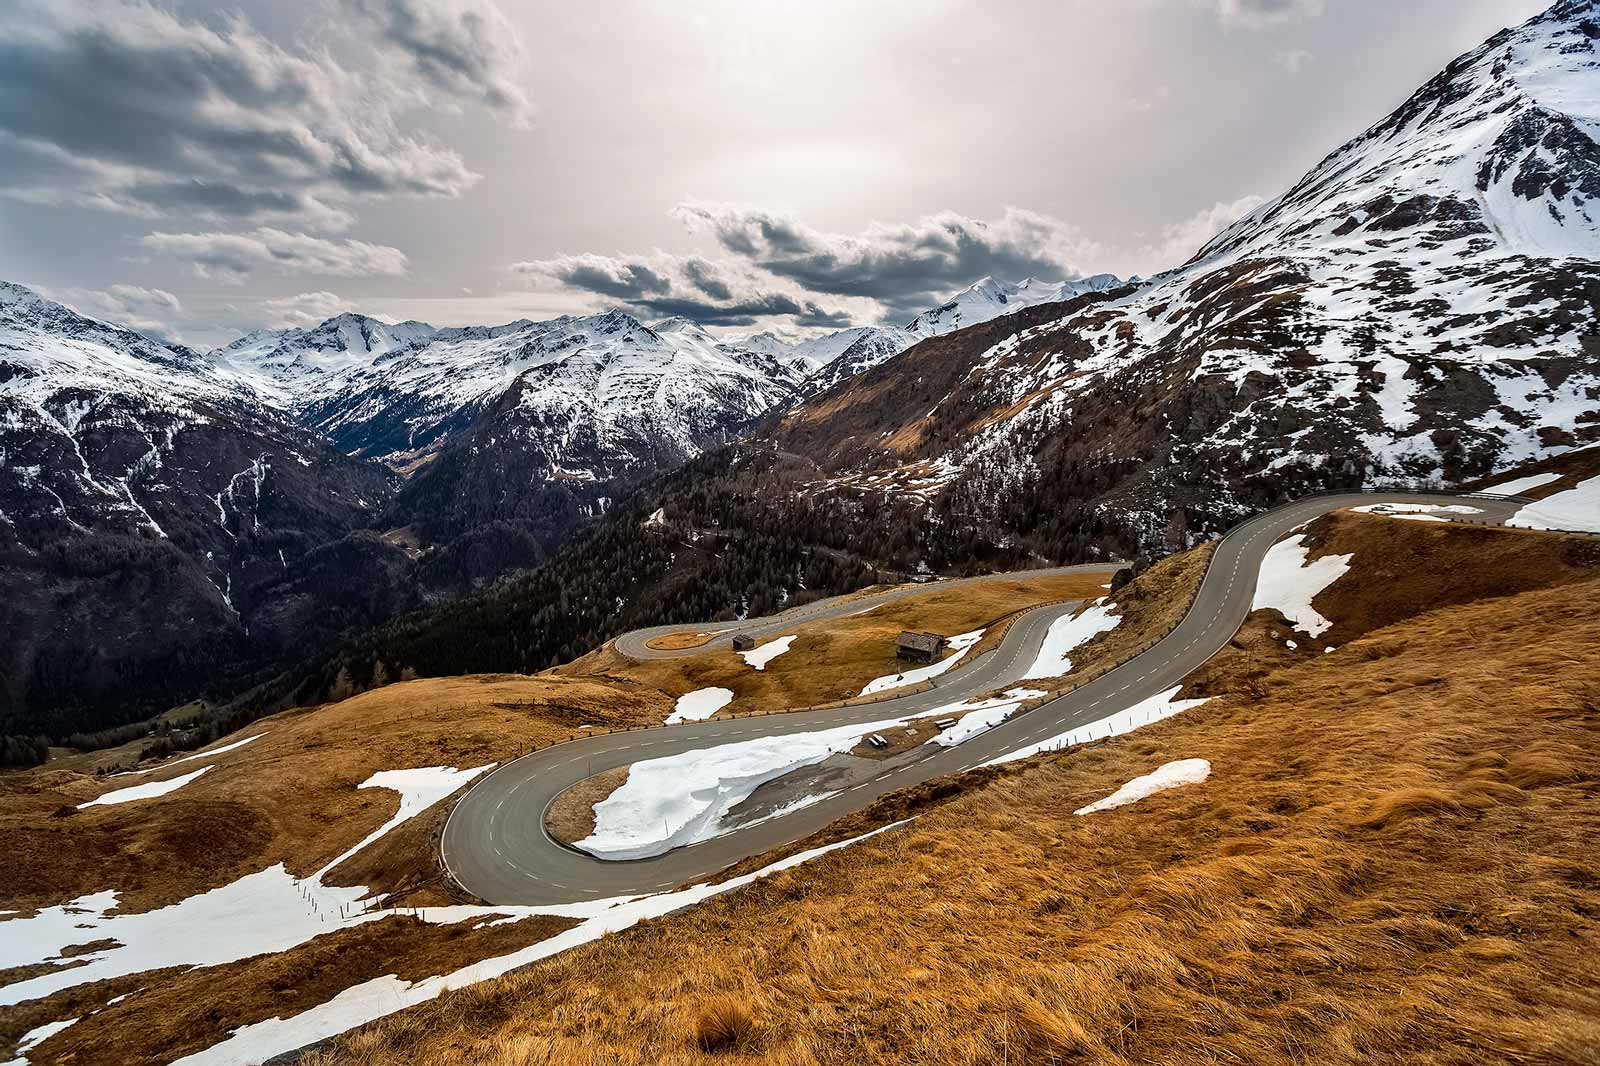 The Grossglockner High Alpine Road is the highest surfaced mountain pass road in Austria. We were there on the first opening day, May 1.